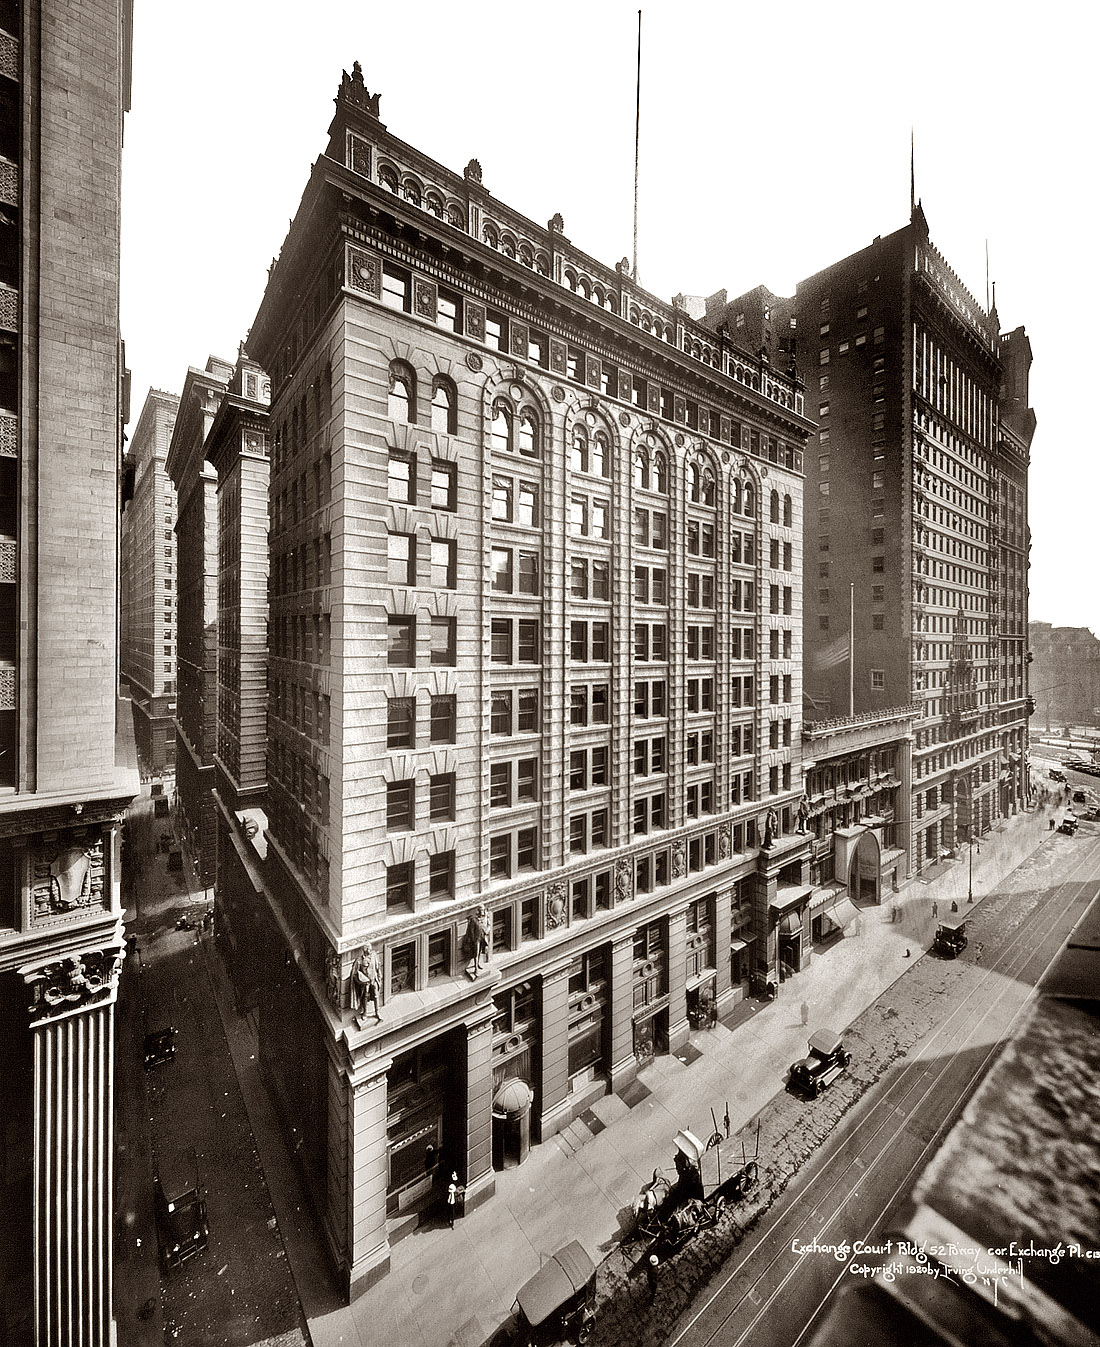 New York, 1920. Exchange Court Building at 52 Broadway and Exchange Place. View full size. Photograph by Irving Underhill. Completed in 1898, the structure was rebuilt with additional floors and a modern facade in 1980-82.